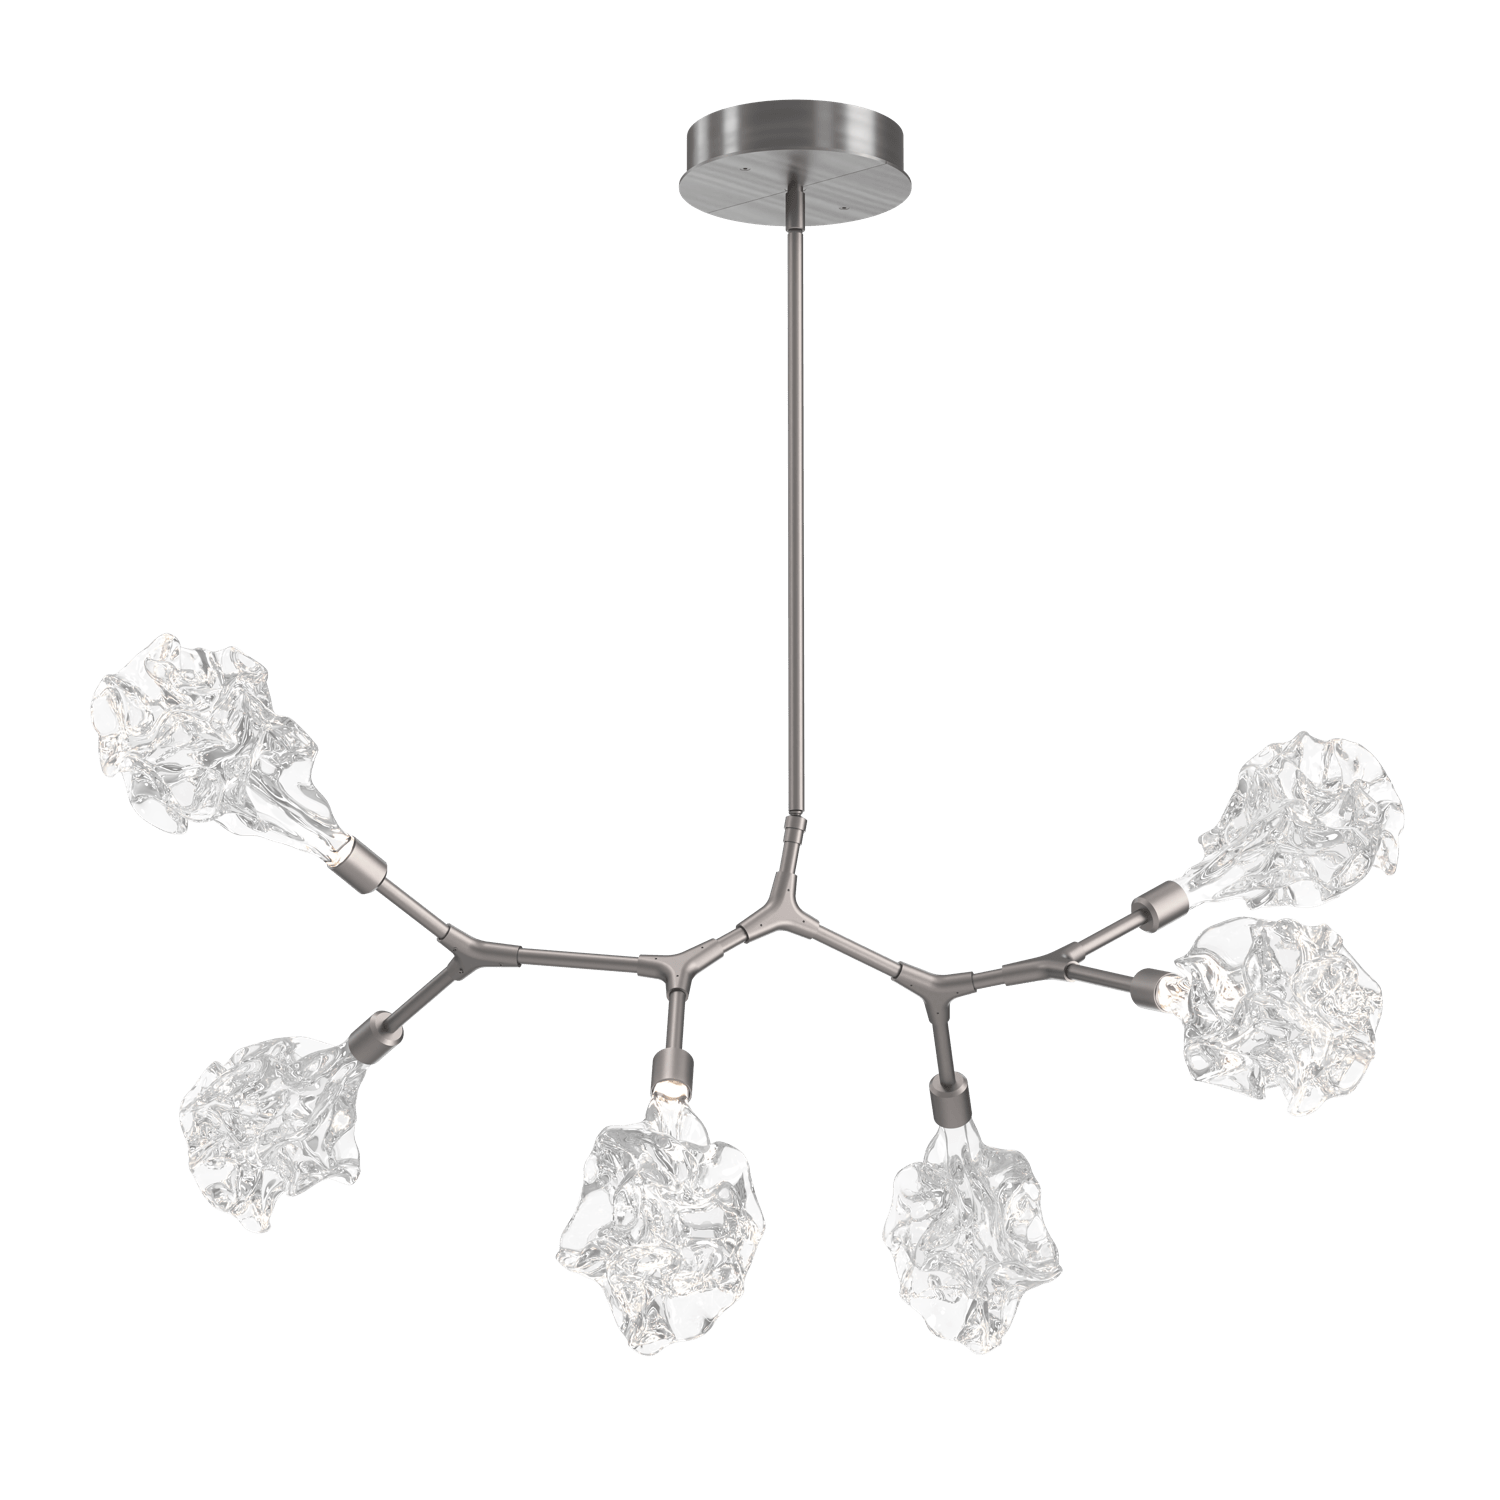 PLB0059-BA-SN-Hammerton-Studio-Blossom-6-light-organic-branch-chandelier-with-satin-nickel-finish-and-clear-handblown-crystal-glass-shades-and-LED-lamping